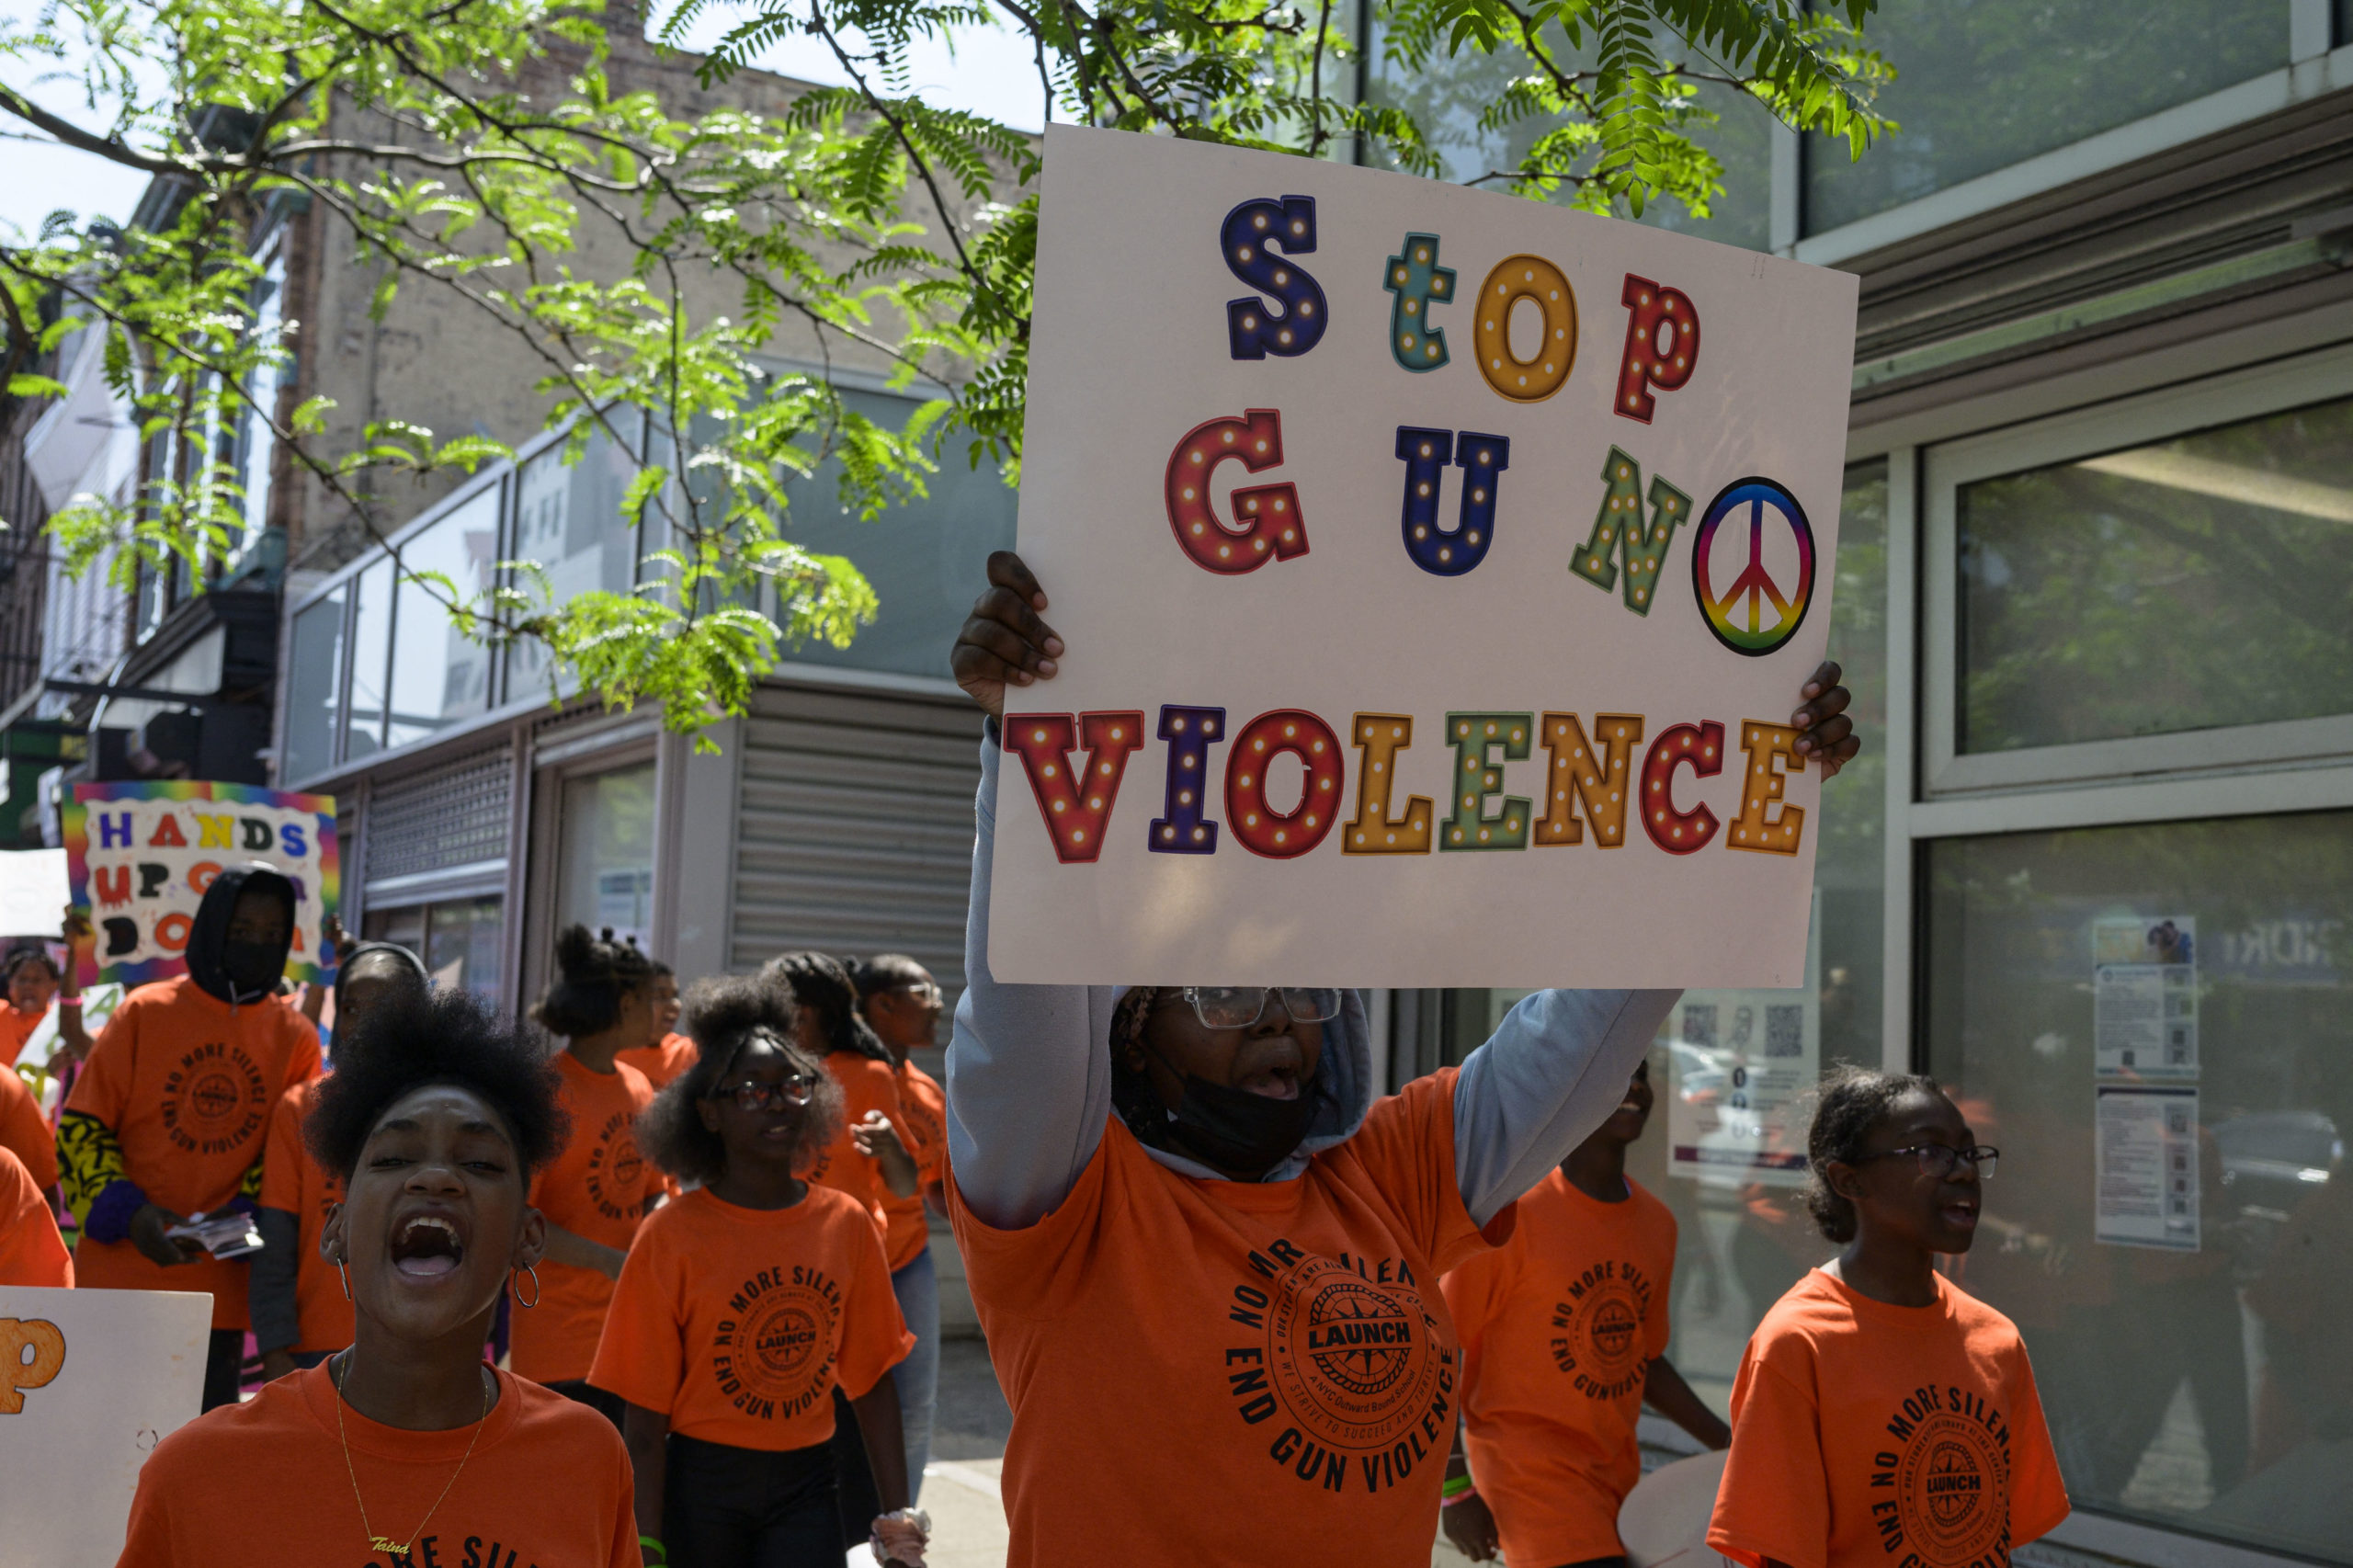 Launch Expeditionary Charter School students participate in a walkout to end gun violence and to mark National Gun Violence Awareness Day on June 2, 2023 in New York. (Photo by ANGELA WEISS / AFP) (Photo by ANGELA WEISS/AFP via Getty Images)